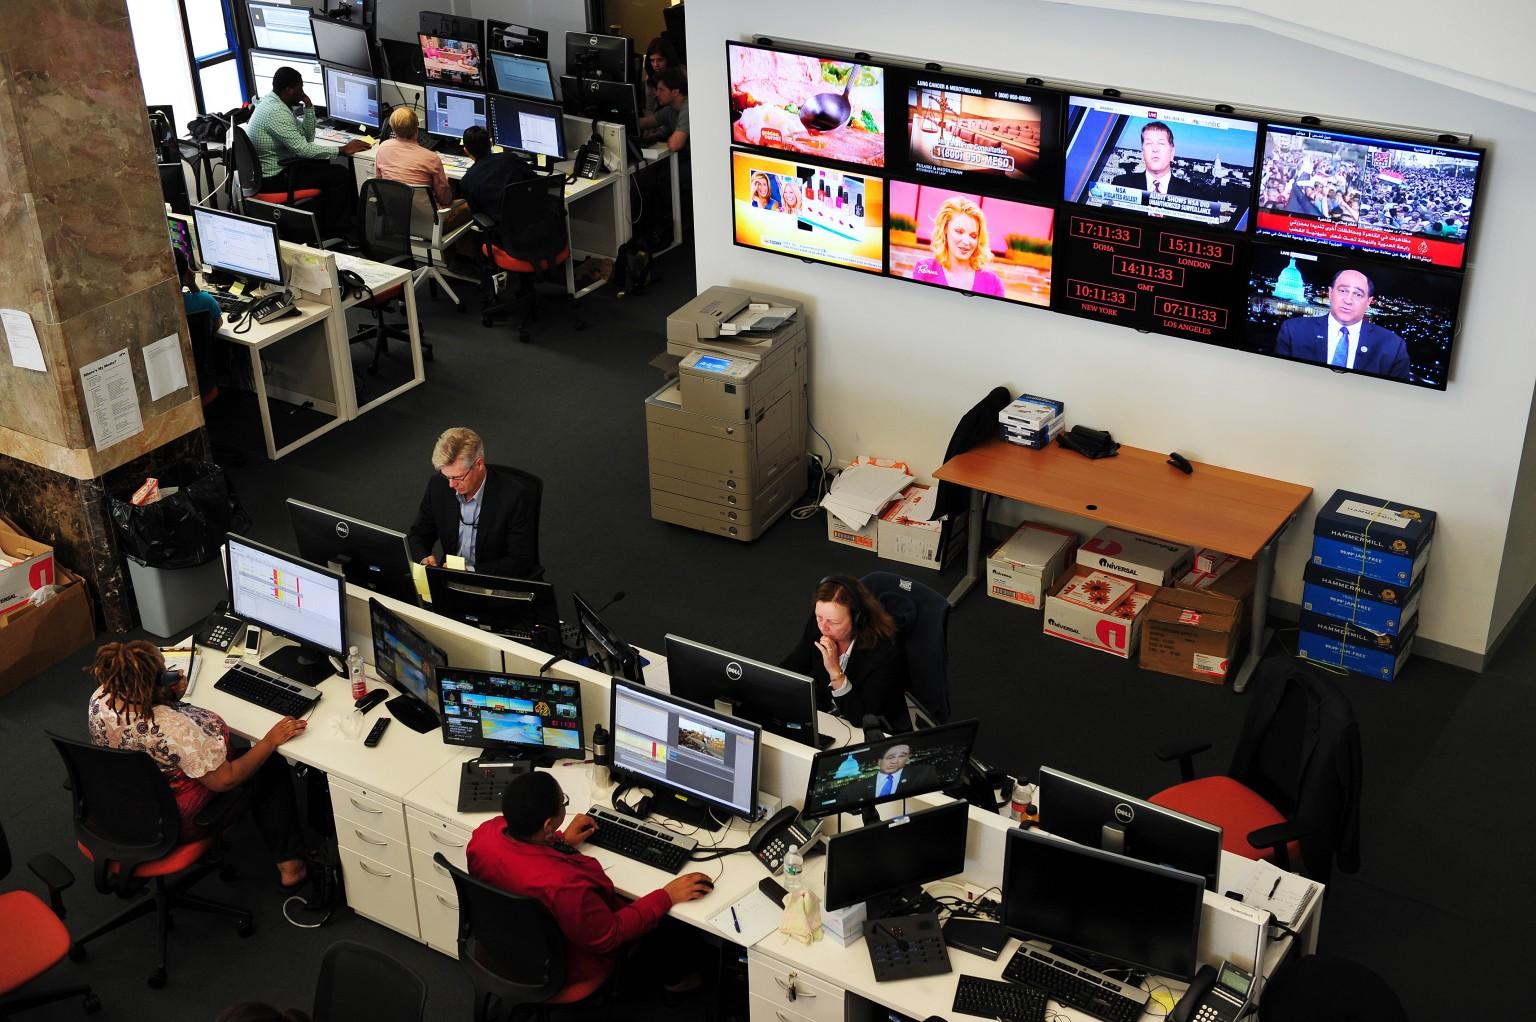 At its peak Al-Jazeera America employed some 850 staff across 12 US news bureaus and a state-of-the art television studio in New York.